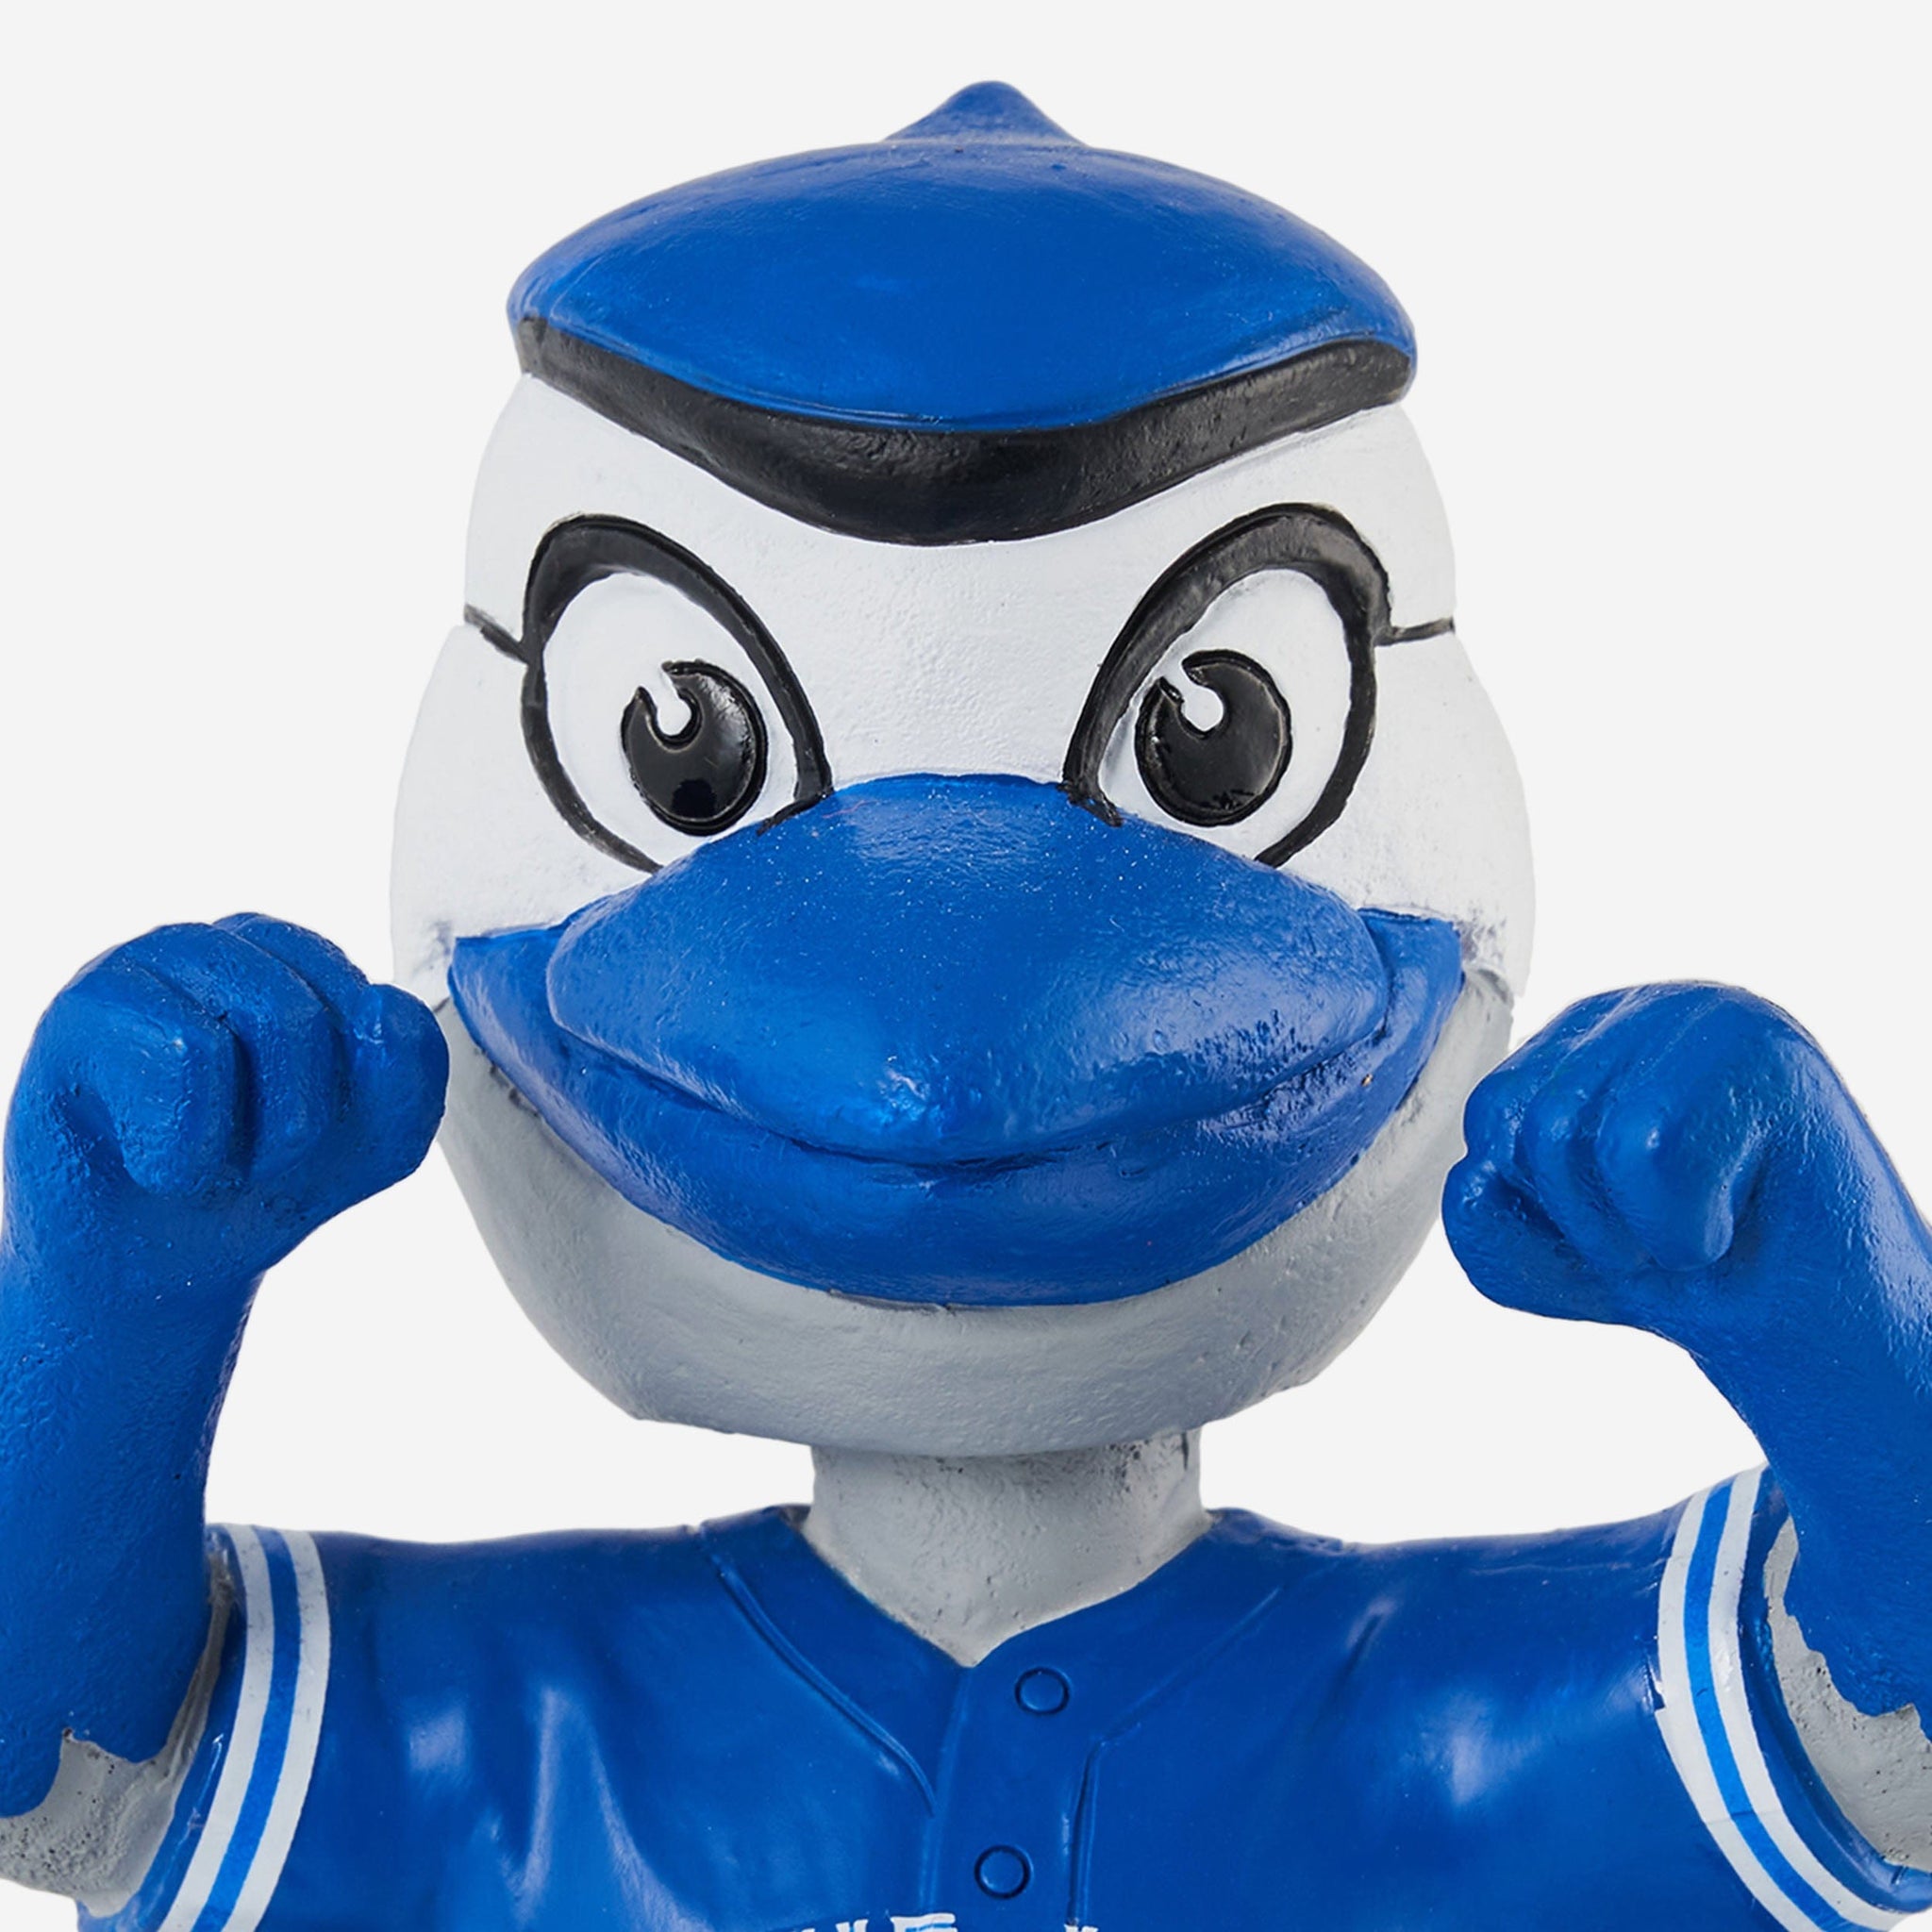 Ace Toronto Blue Jays Gate Series Mascot Bobblehead Officially Licensed by MLB